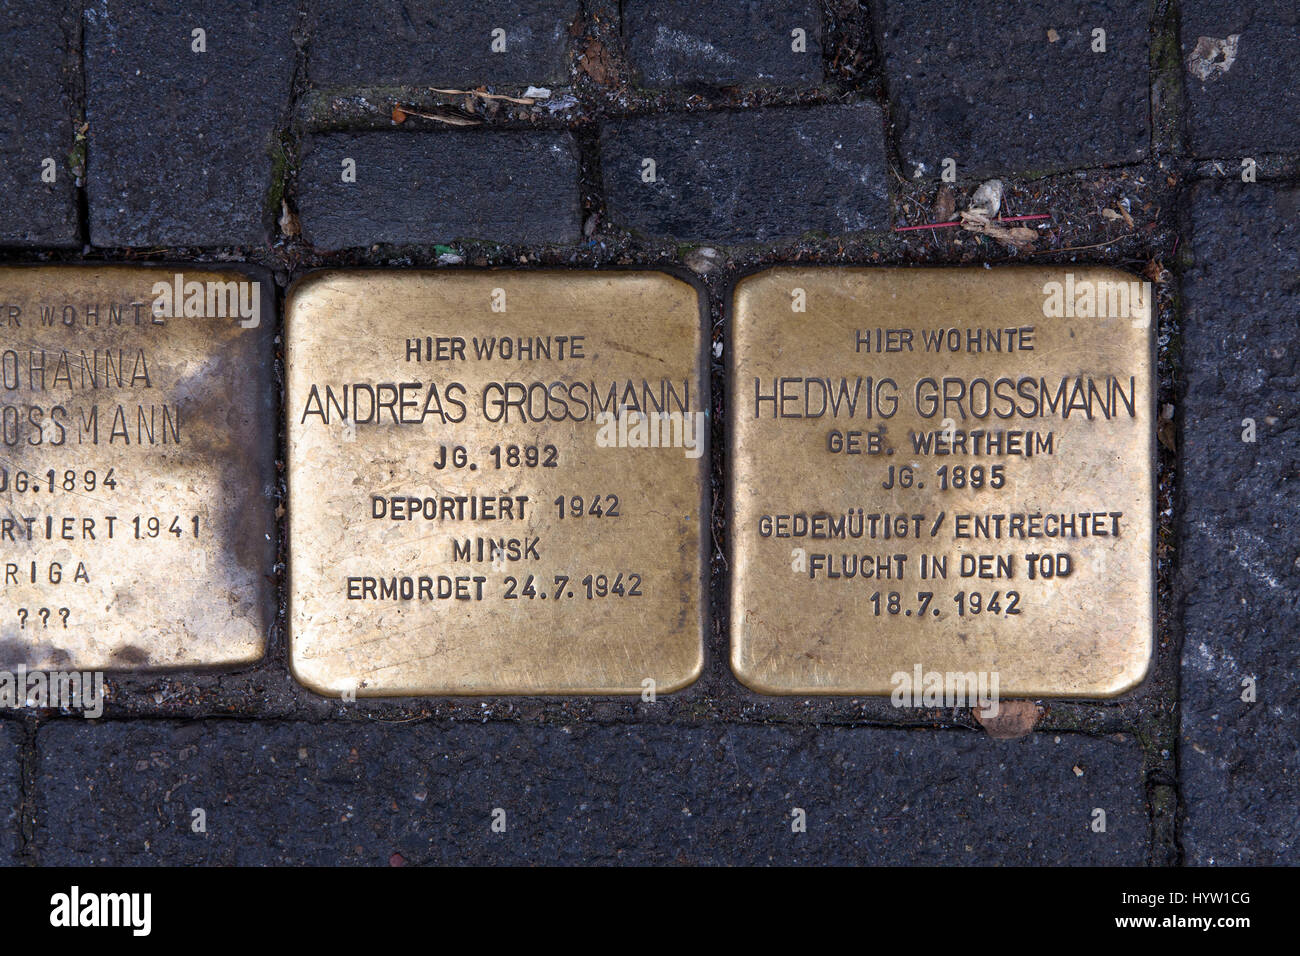 Germany, Cologne, Stolpersteine (stumbling stones) by the artist Gunter Demnig. The stones commemorate the victims of National Socialism (Nazi time). Stock Photo